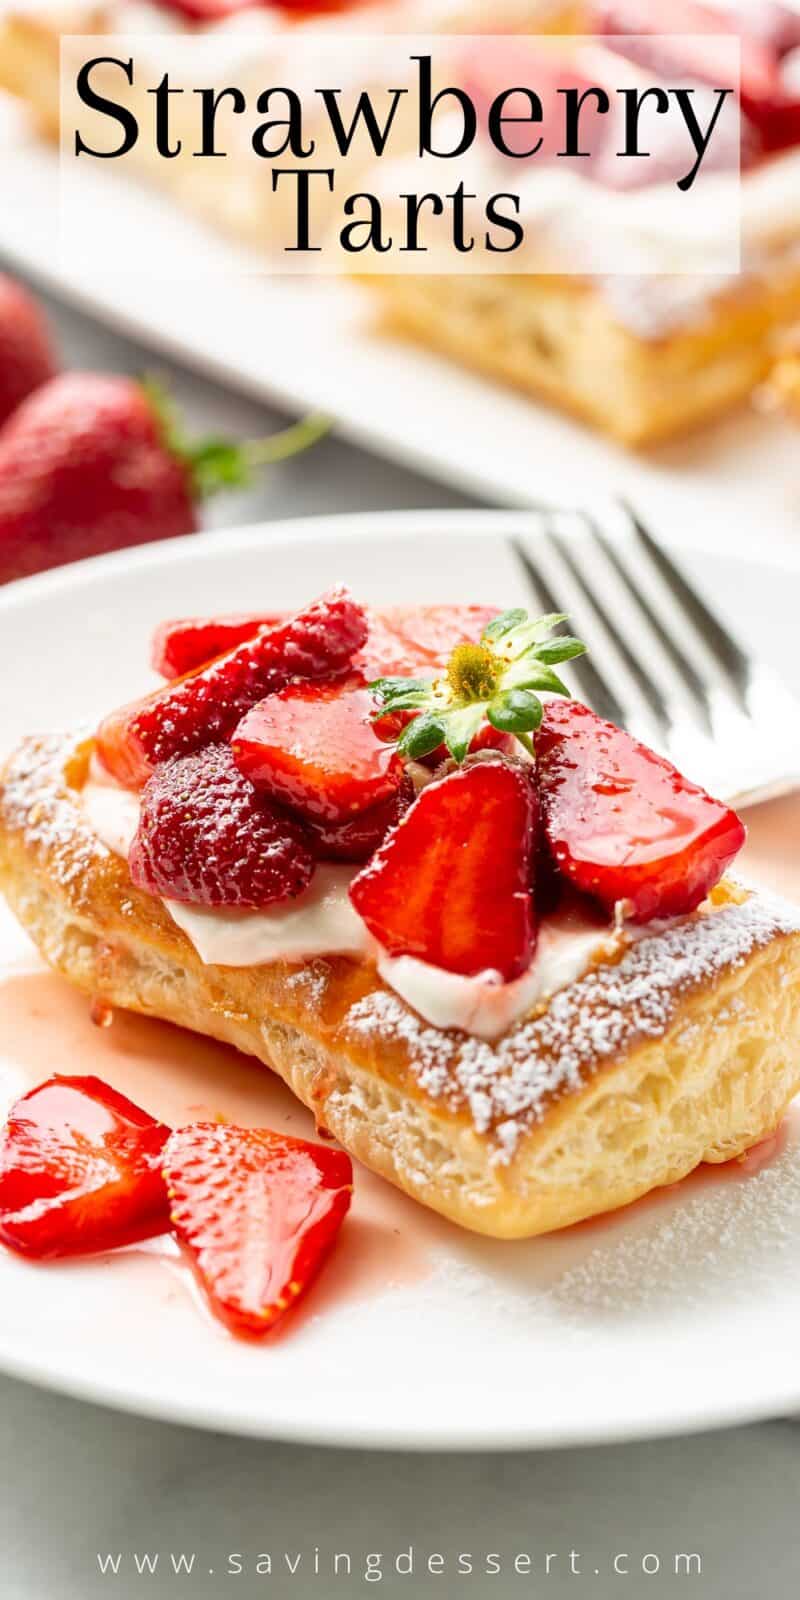 A cream filled pastry tart topped with strawberries and dusted with powdered sugar